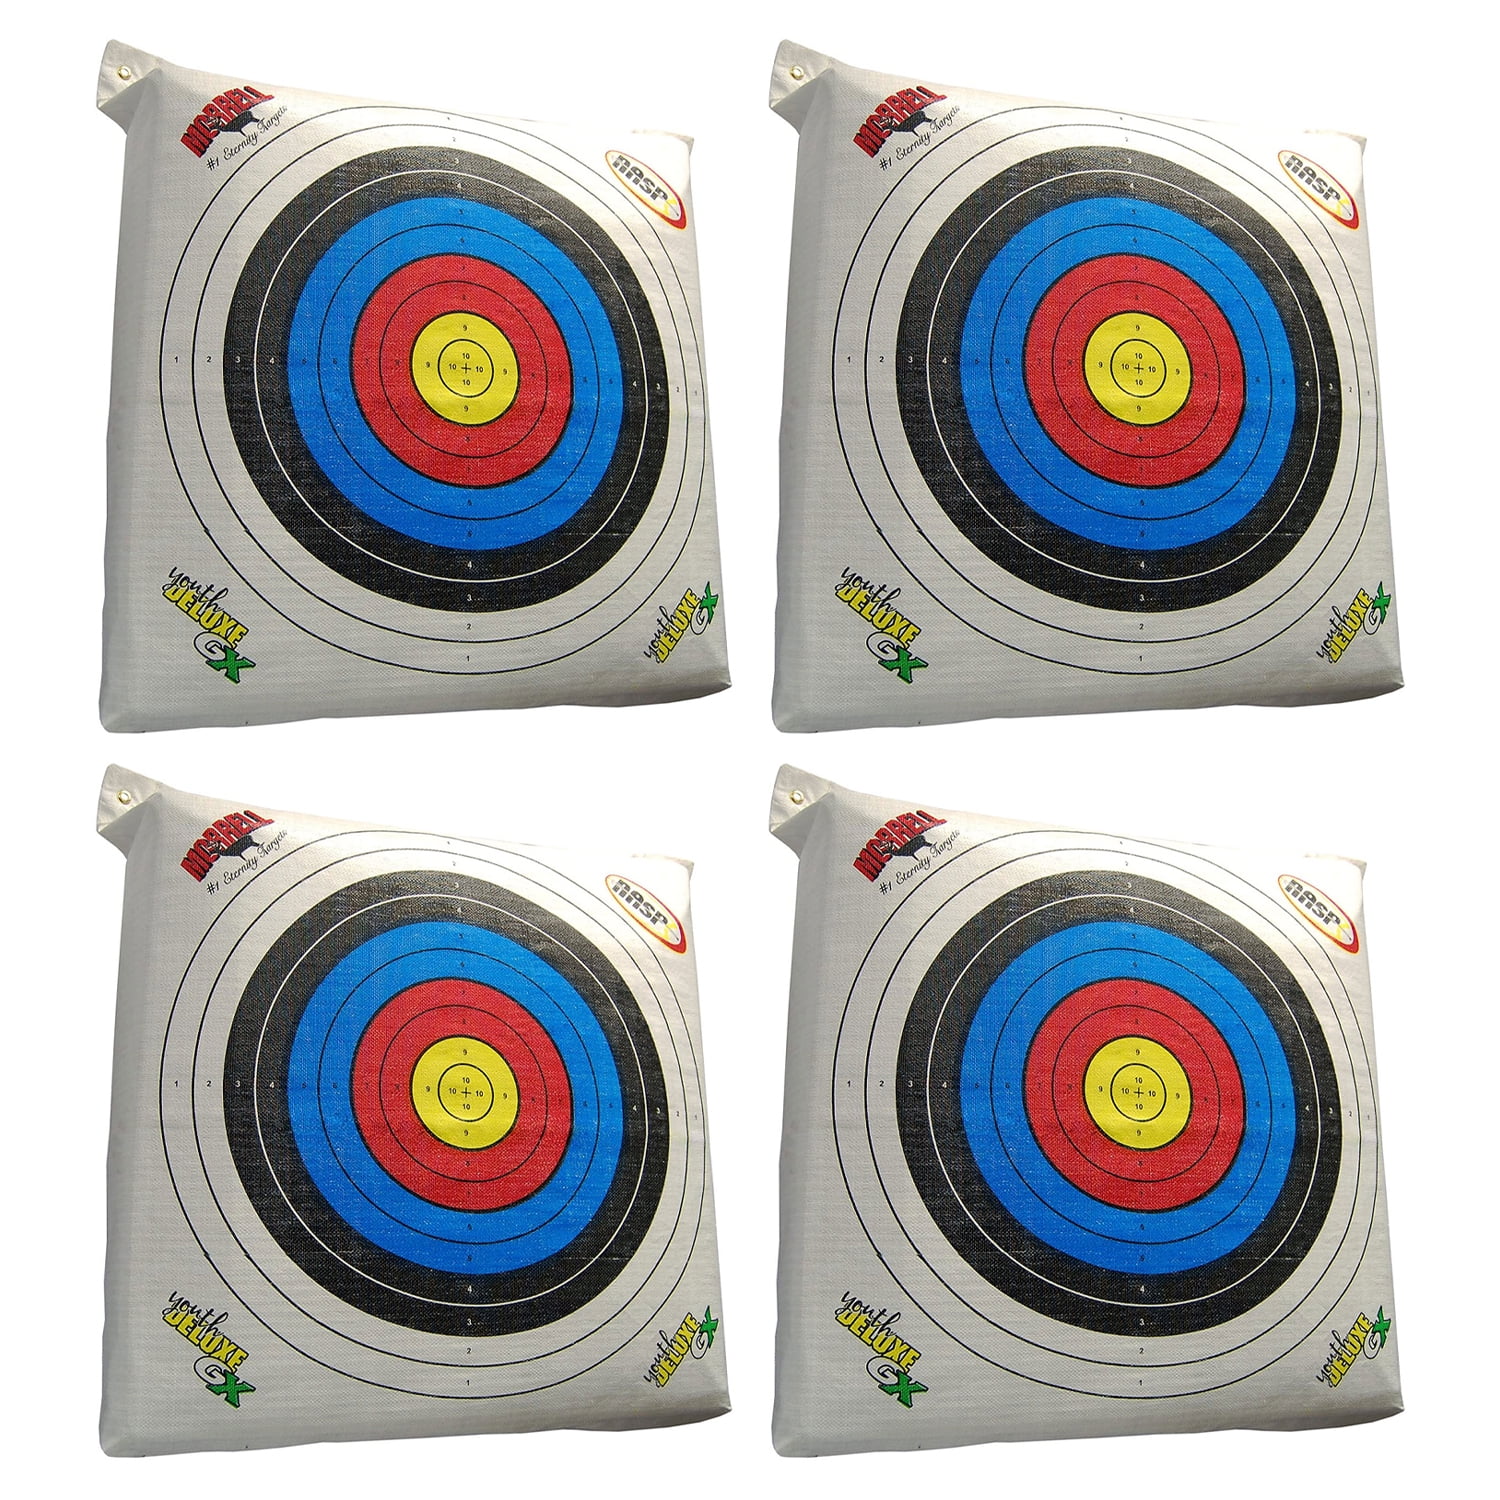 New Morrell NASP Eternity School Field Point Target with internal frame system 